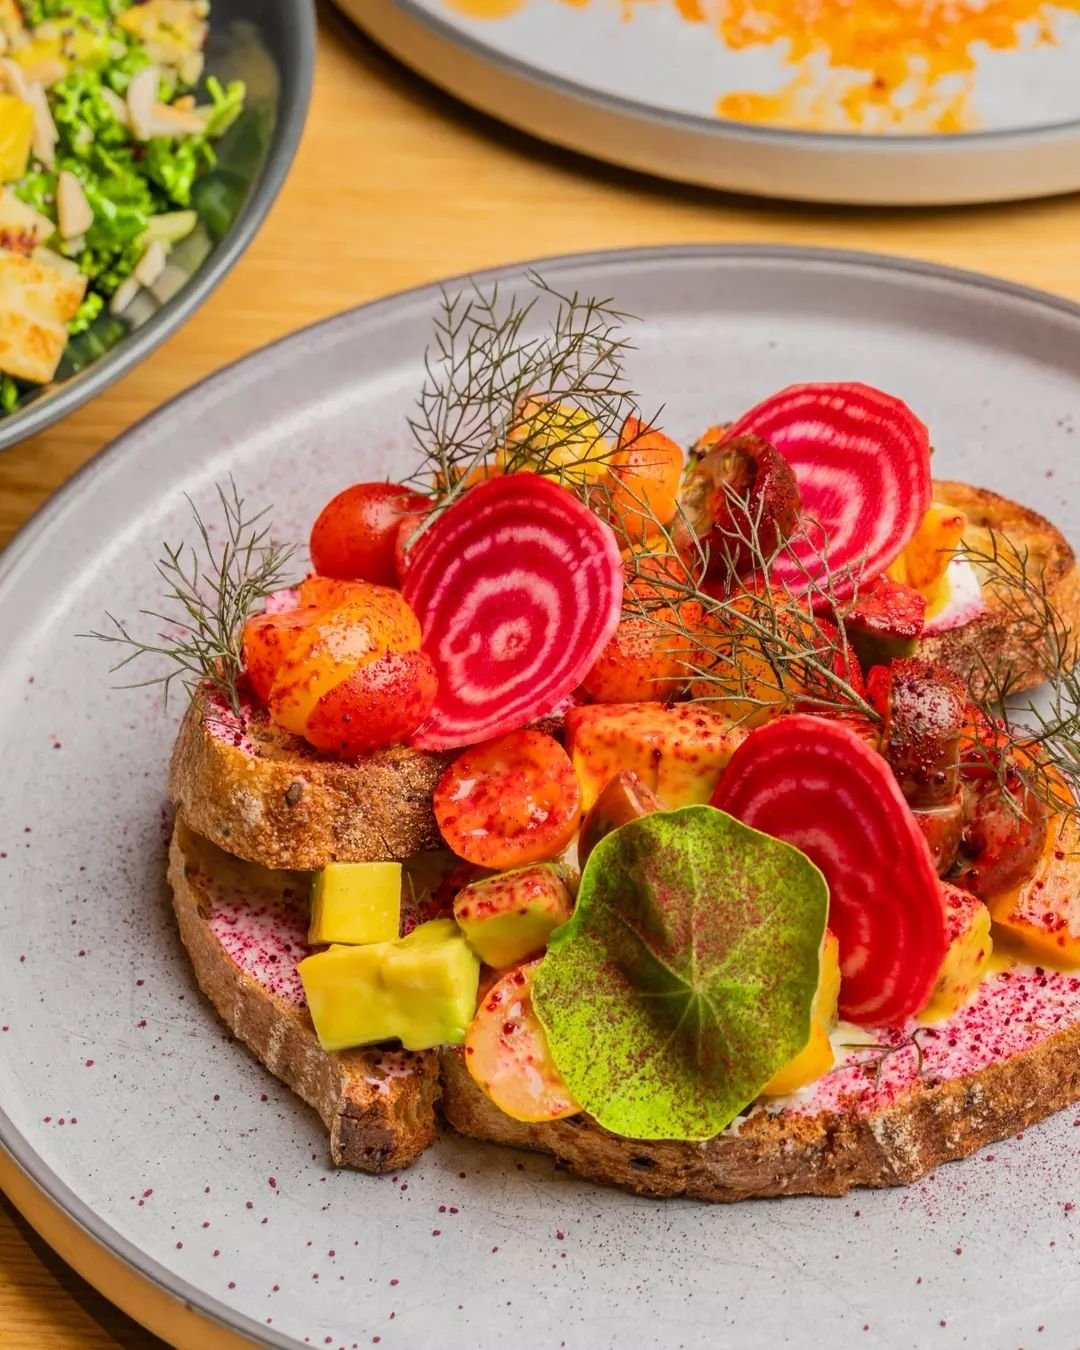 Meet our Avocado Toast, 2.0: now a stack of labneh, diced avocado, burnt orange, cherry tomatoes &amp; heirloom beets, beautifully presented on grain toast and finished with soft herbs. 🌿 🥑

Are you adding a poached egg, smoked salmon or bacon on t